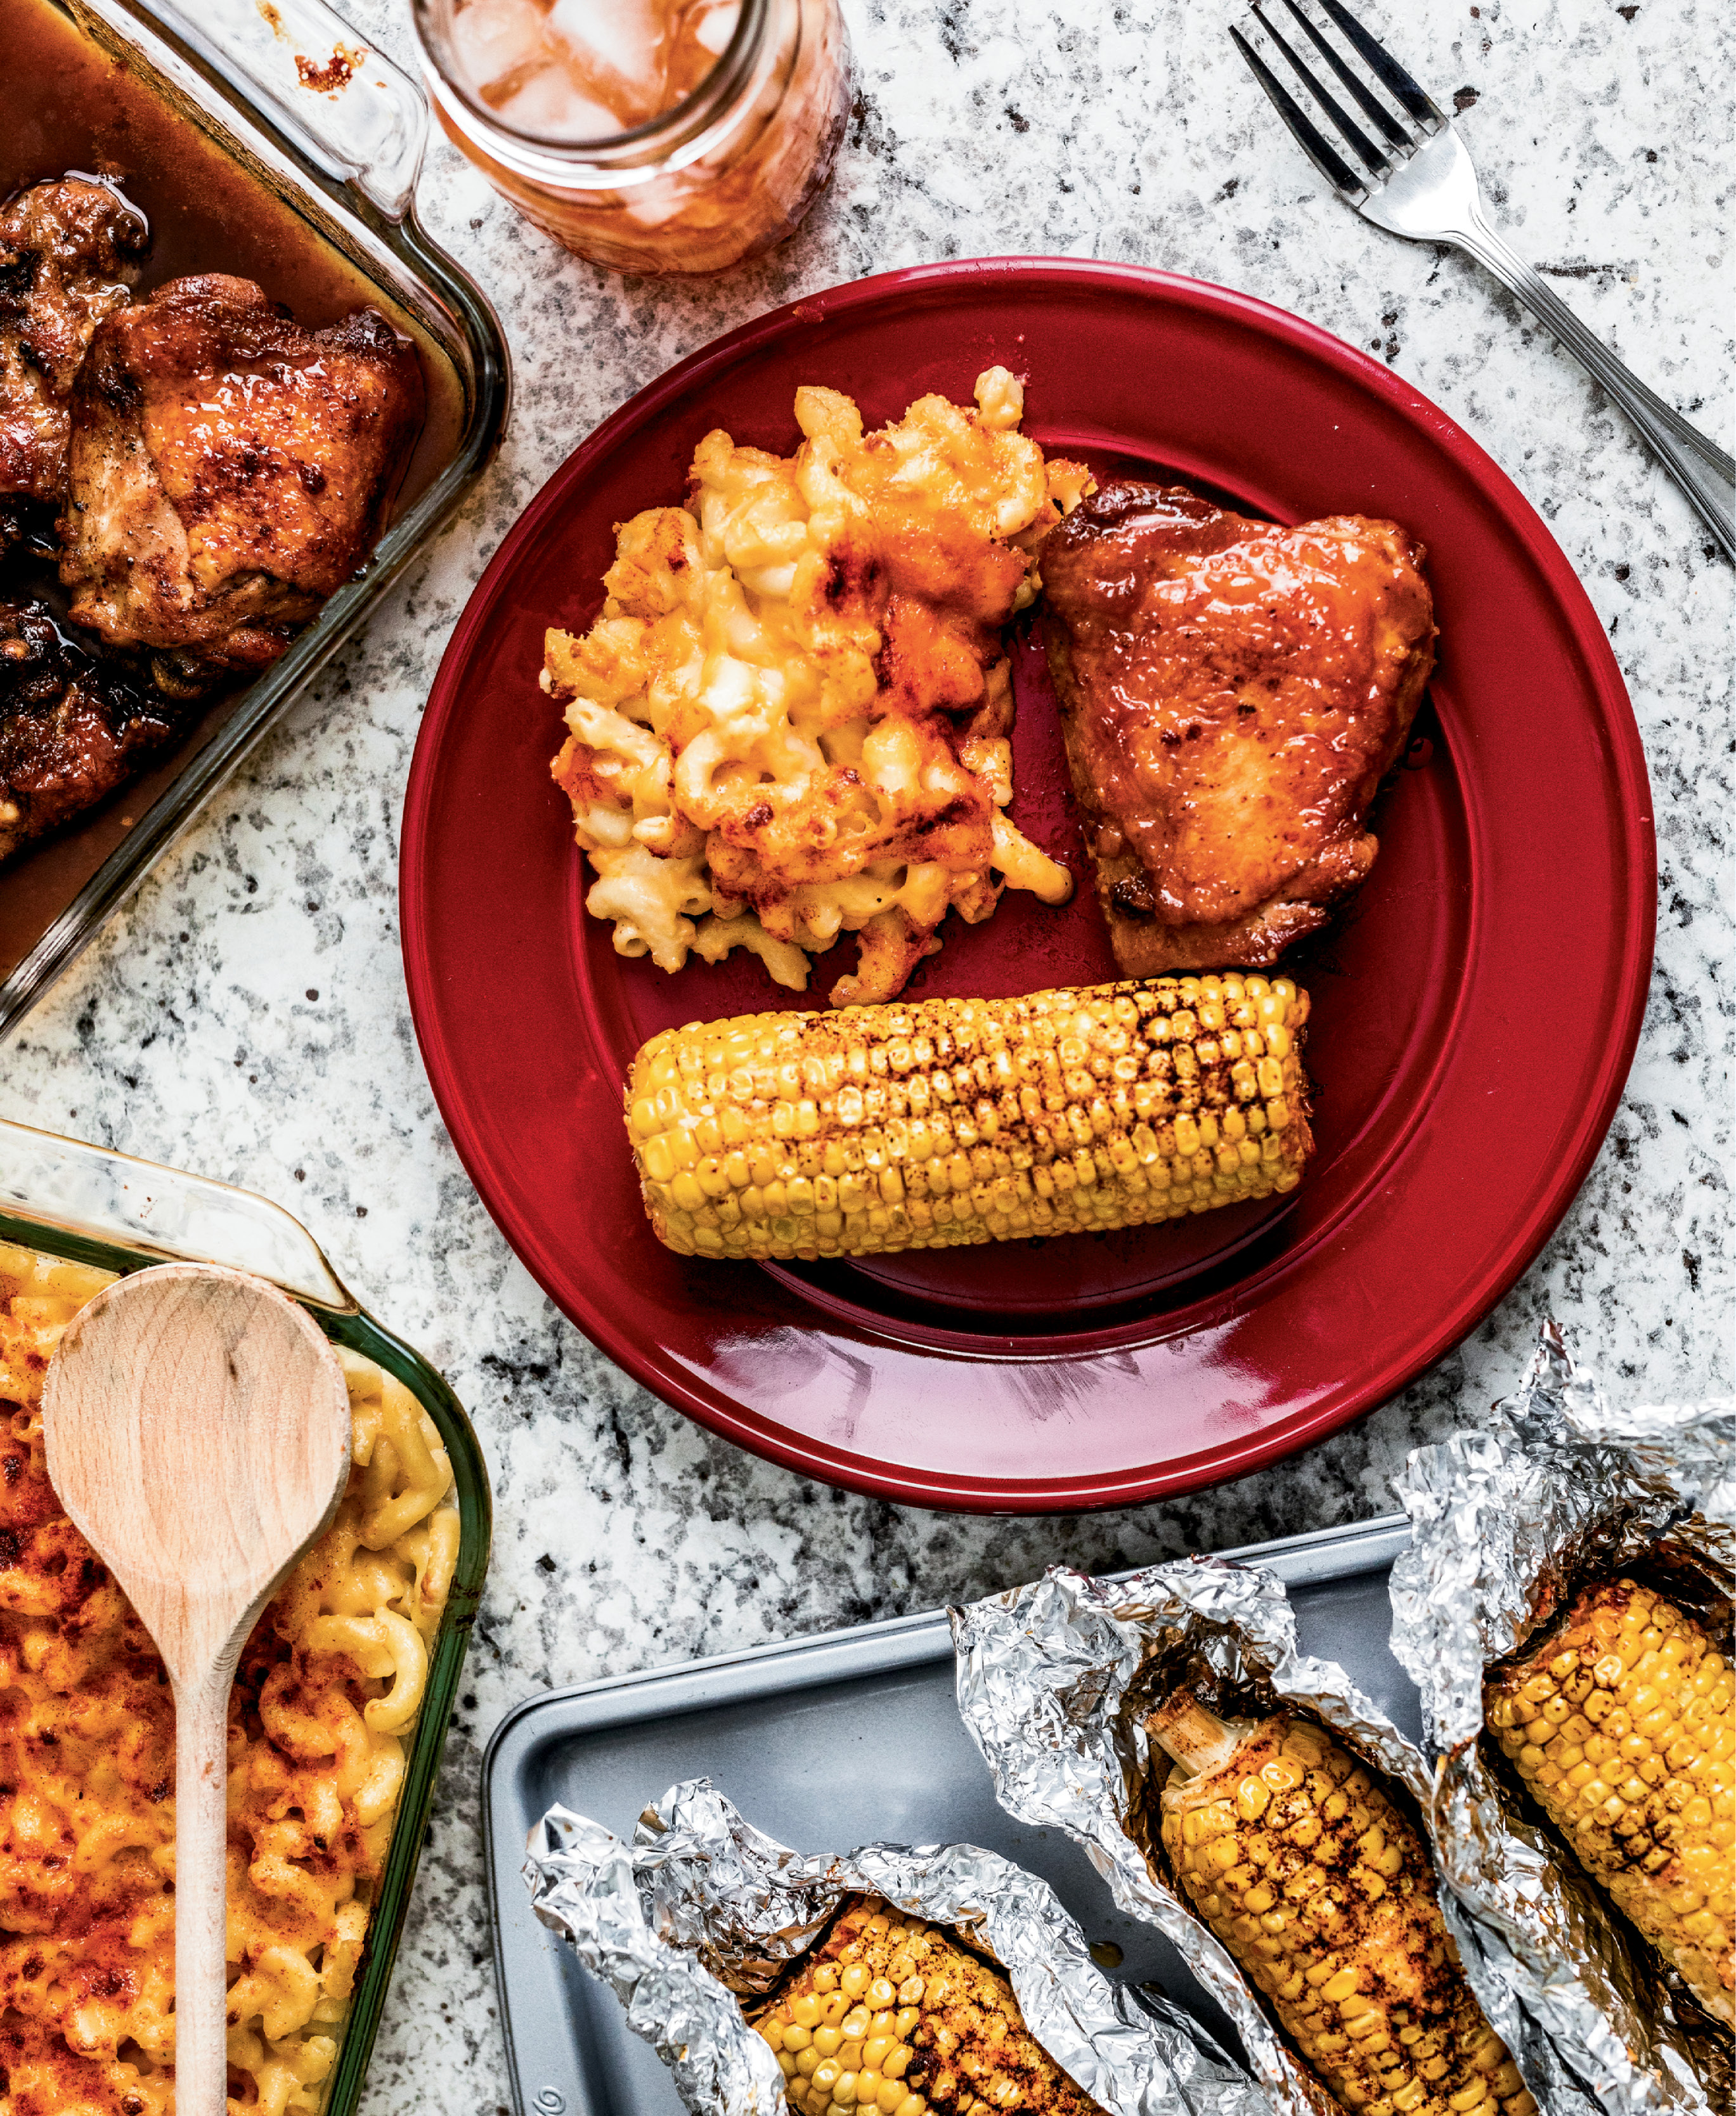 Sweet honey-glazed chicken gets kicked up a notch with sides of paprika-seasoned mac-n-cheese and corn on the cob.